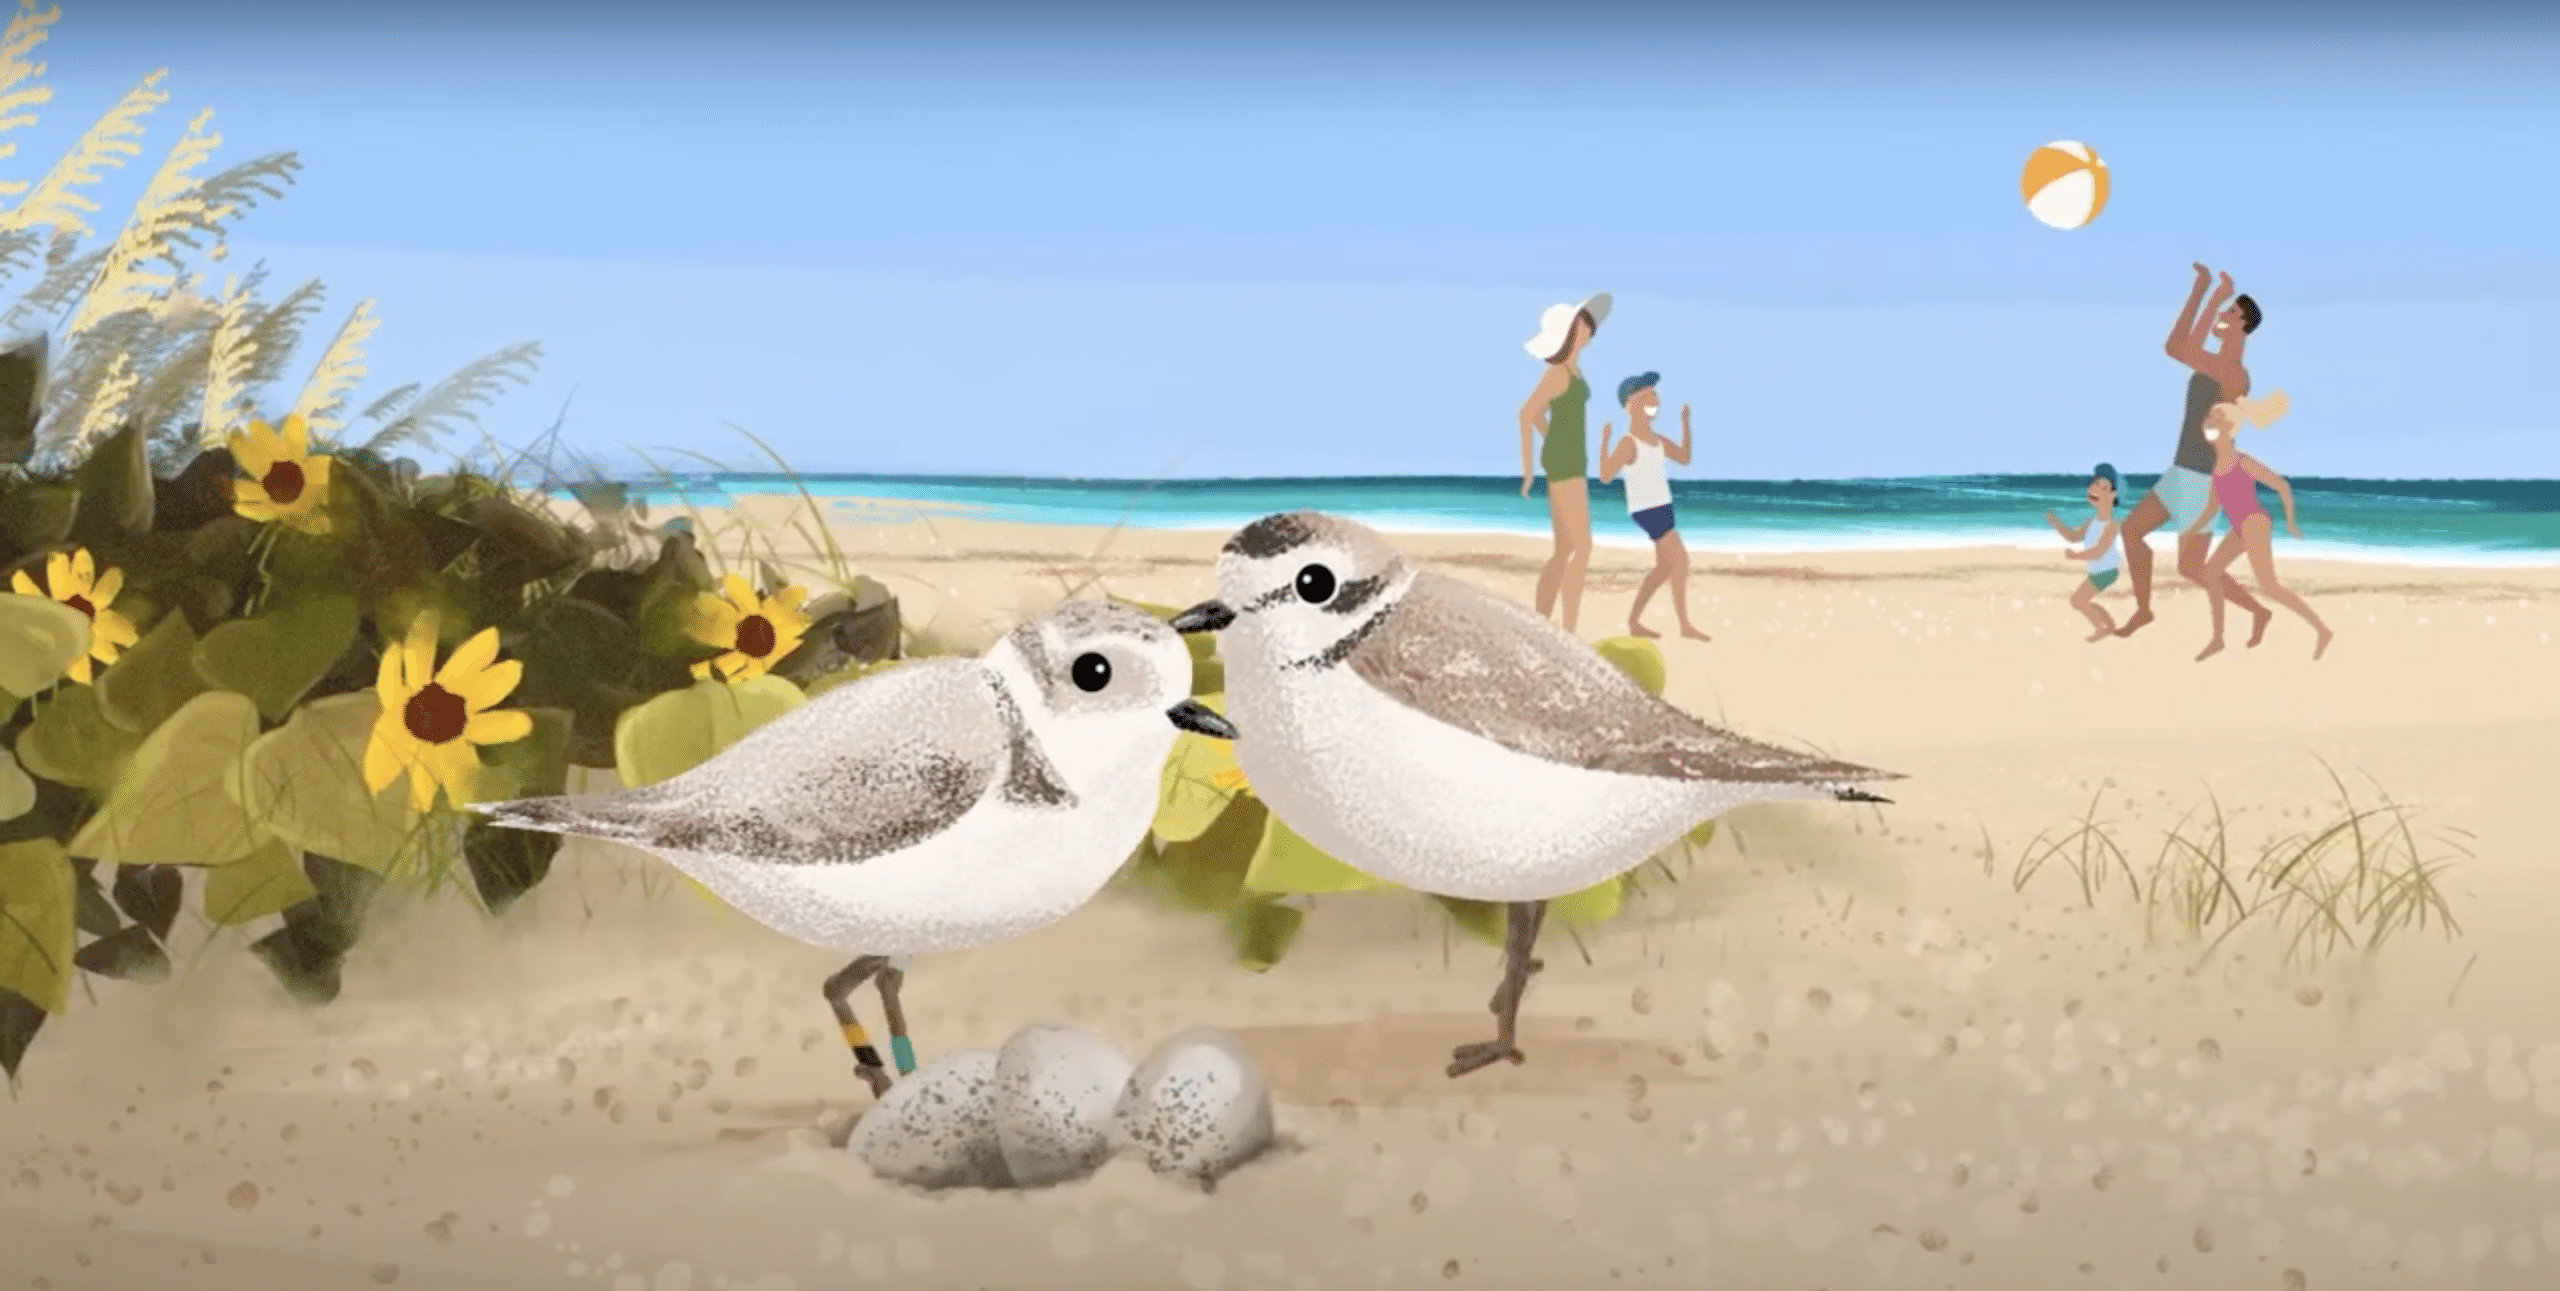 animation of two shorebirds and a family playing on the beach